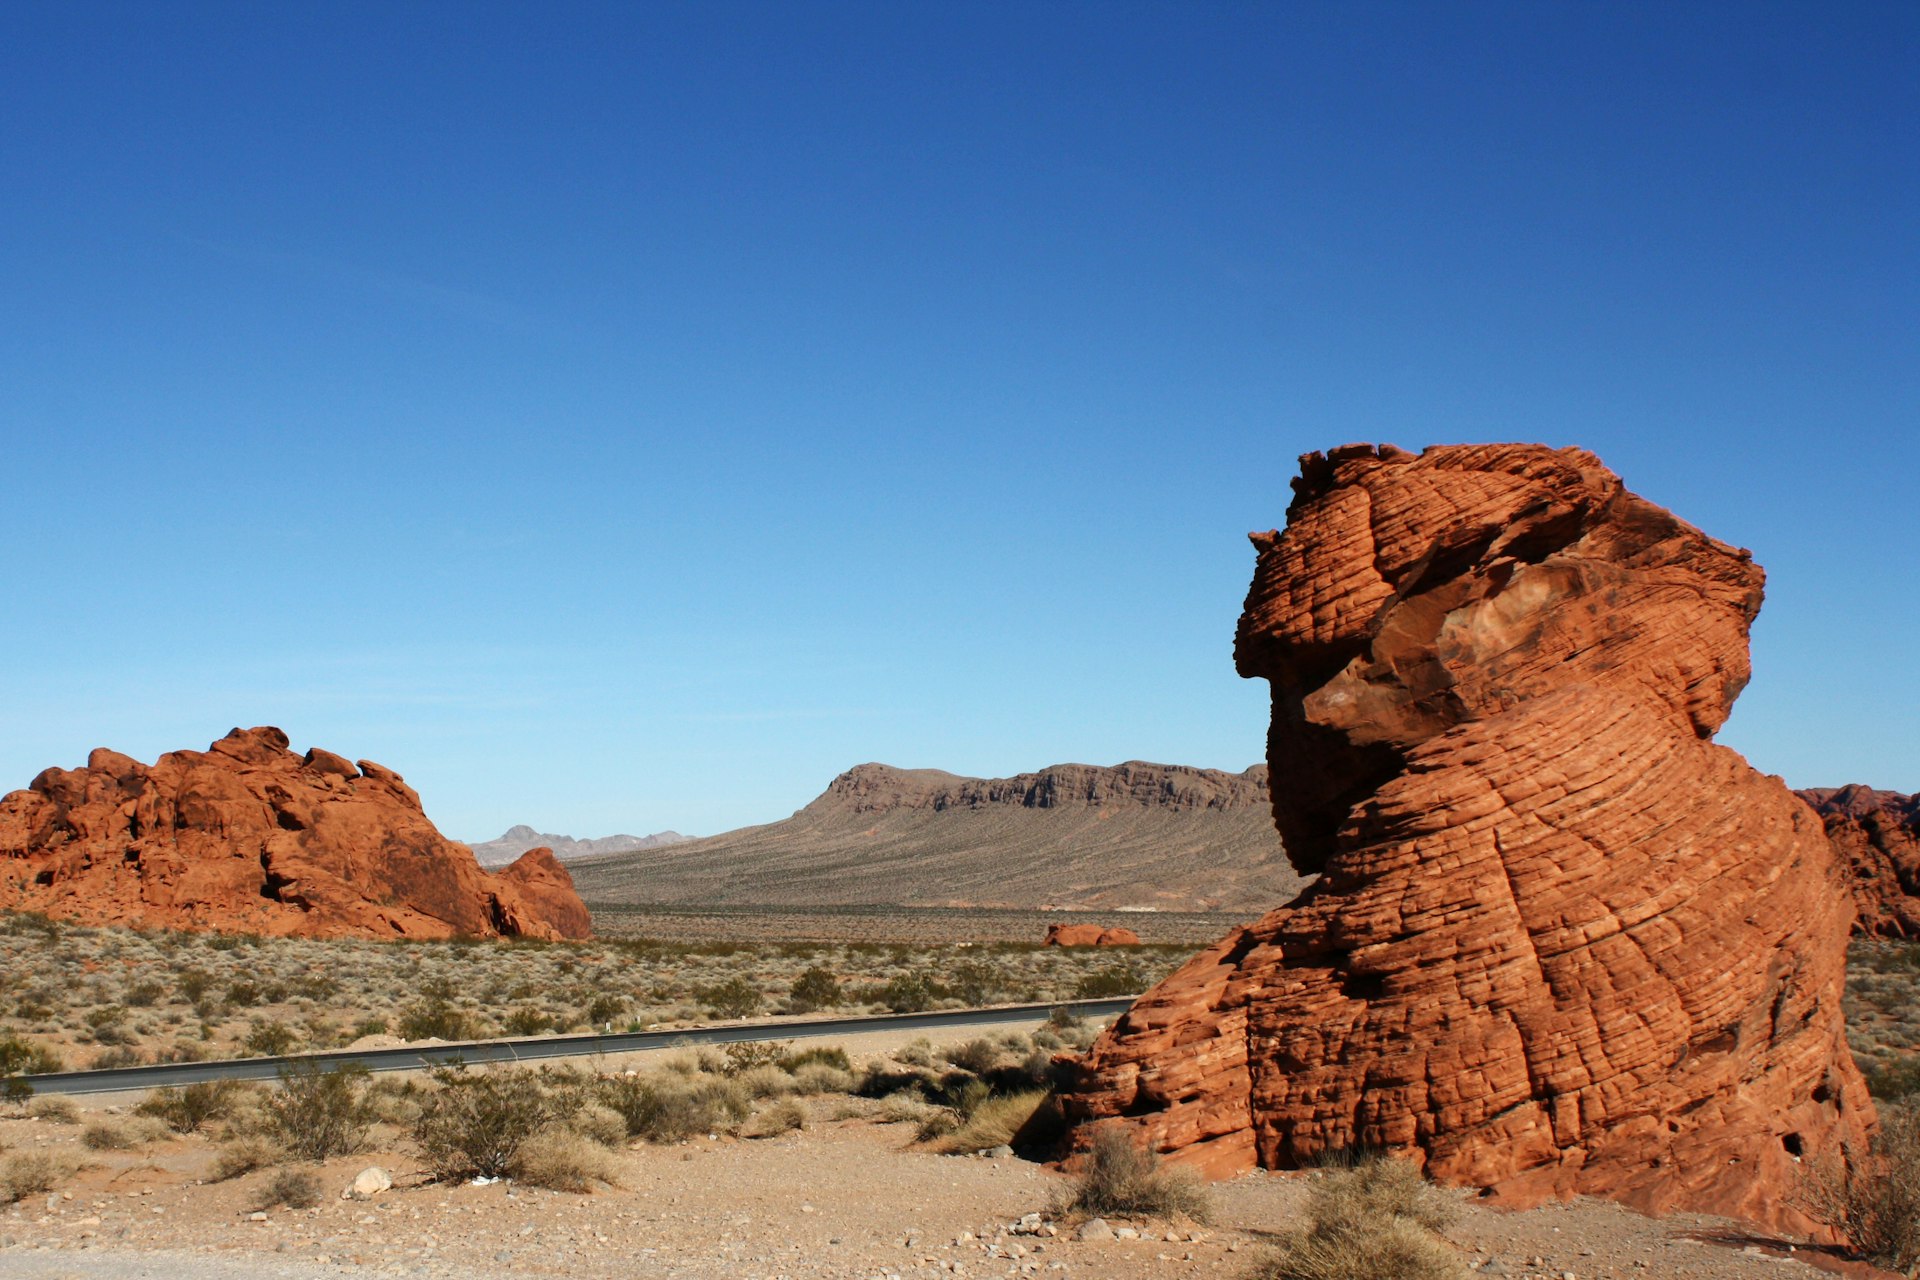 A beehive rock formation in Valley of Fire State Park. Image by Alexander Howard / Lonely Planet